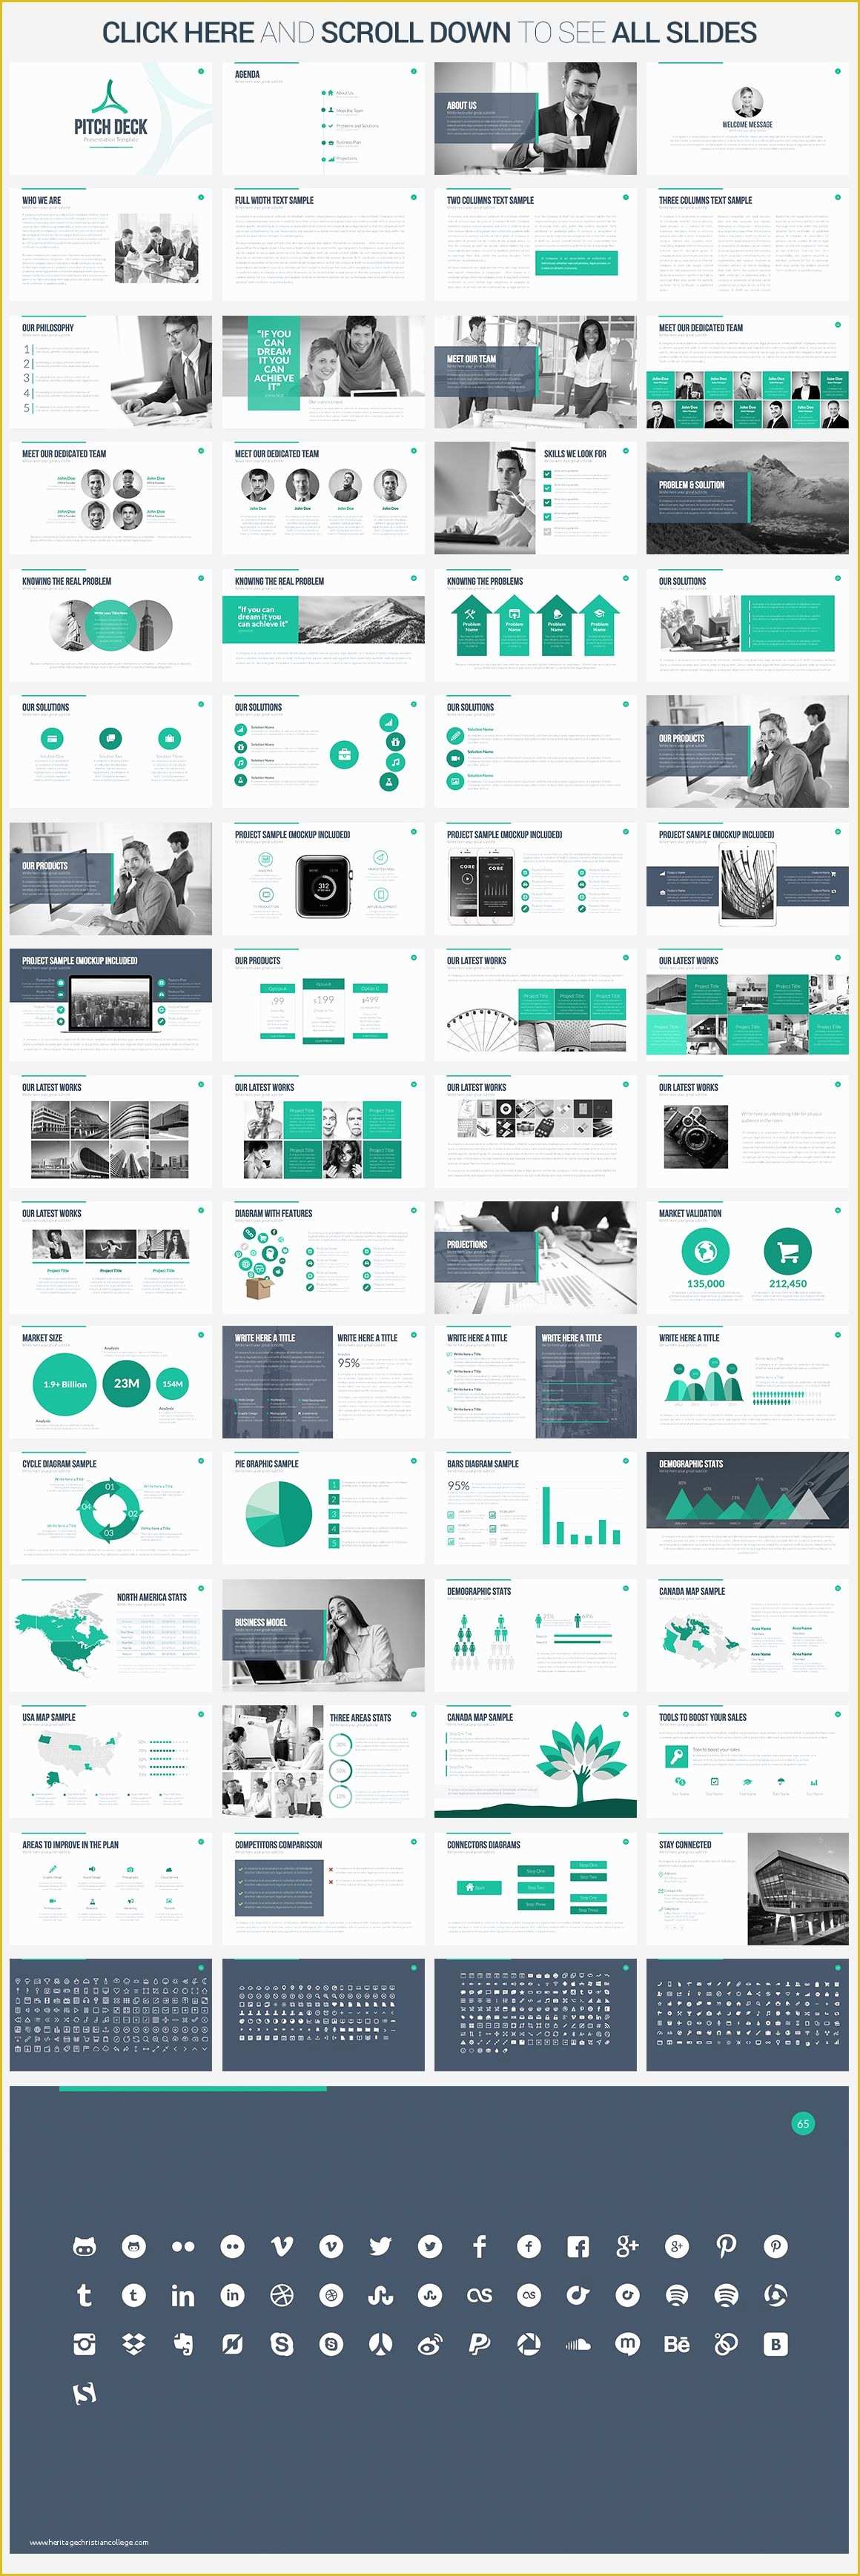 Pitch Deck Template Powerpoint Free Of Pitch Deck Powerpoint Template by Slidepro On Creative